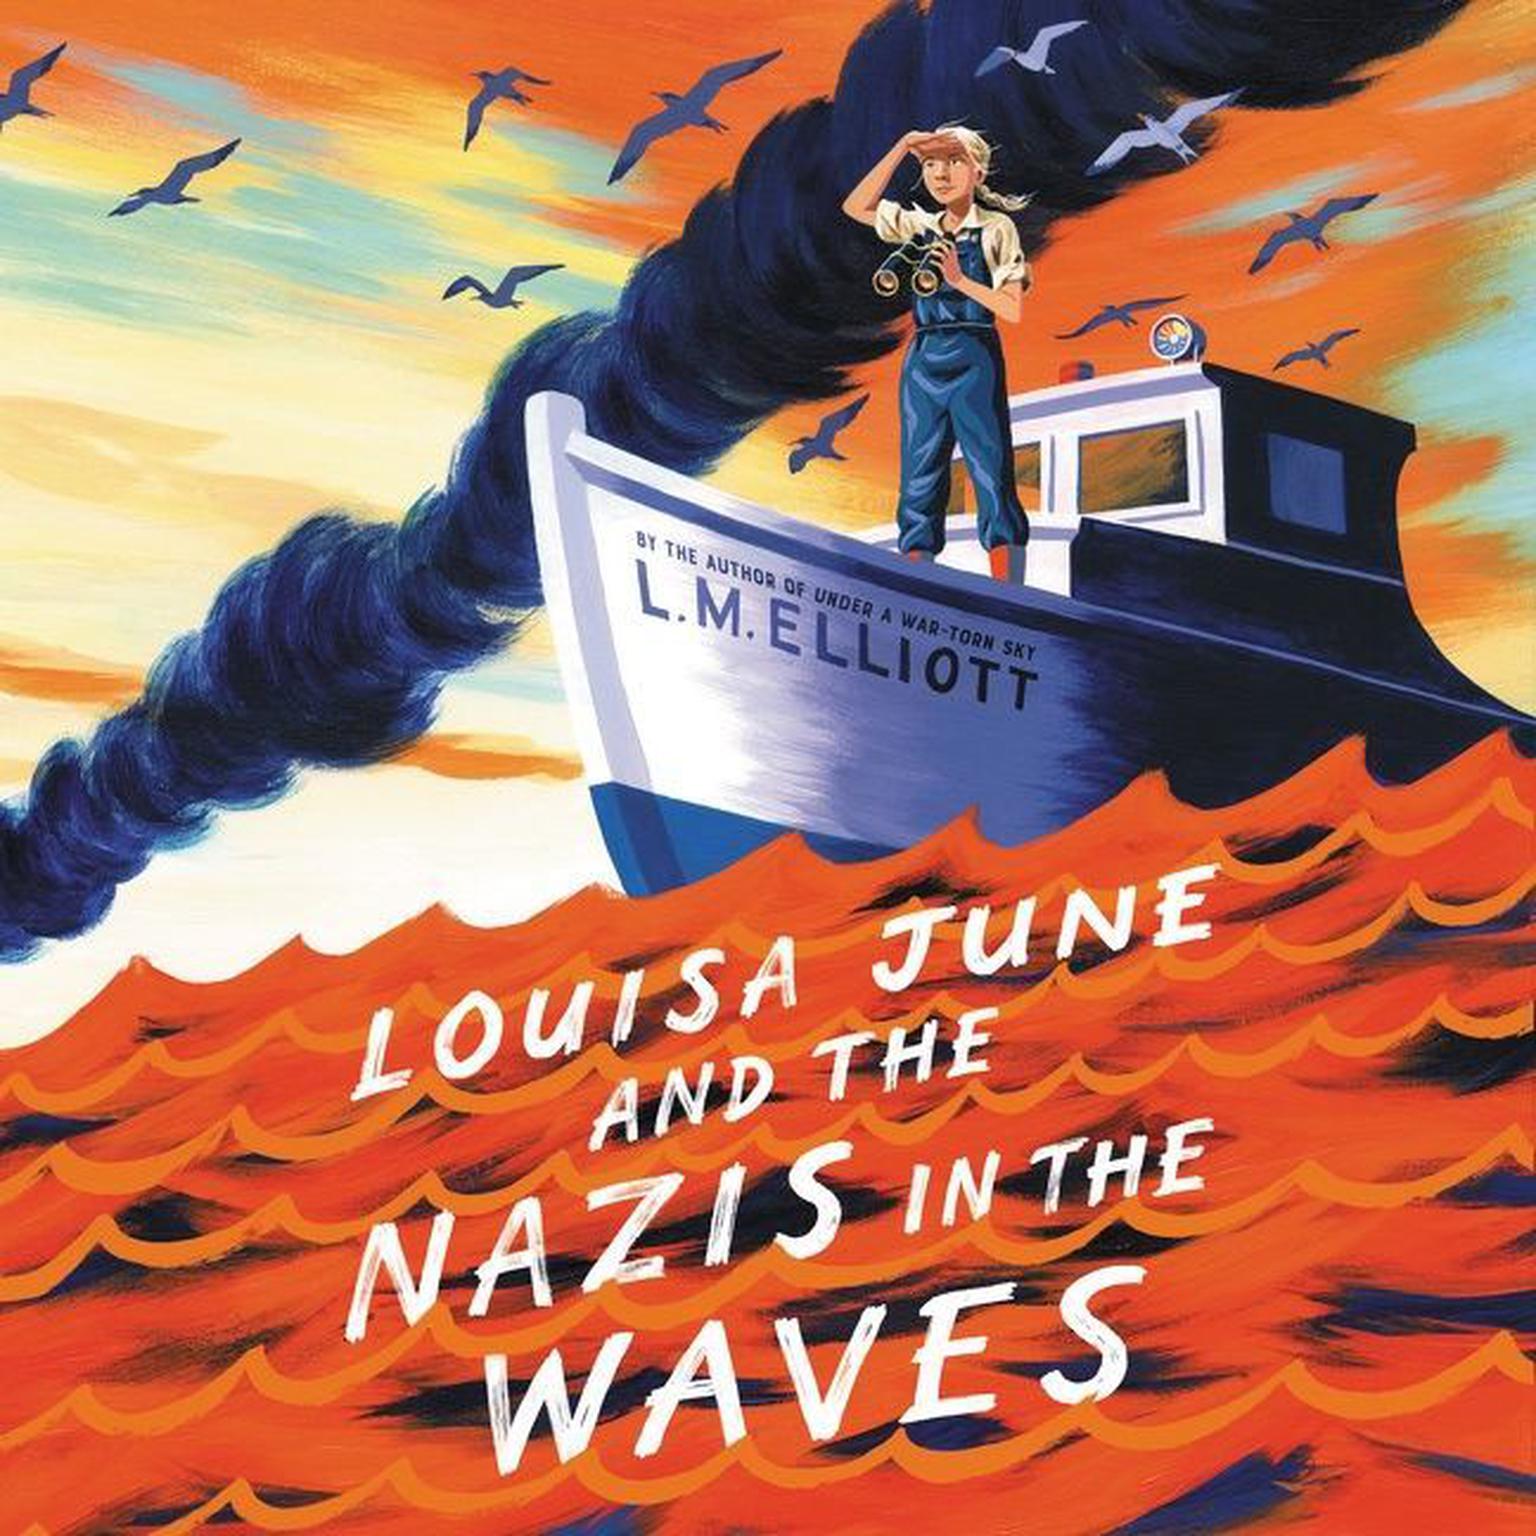 Louisa June and the Nazis in the Waves Audiobook, by L. M. Elliott